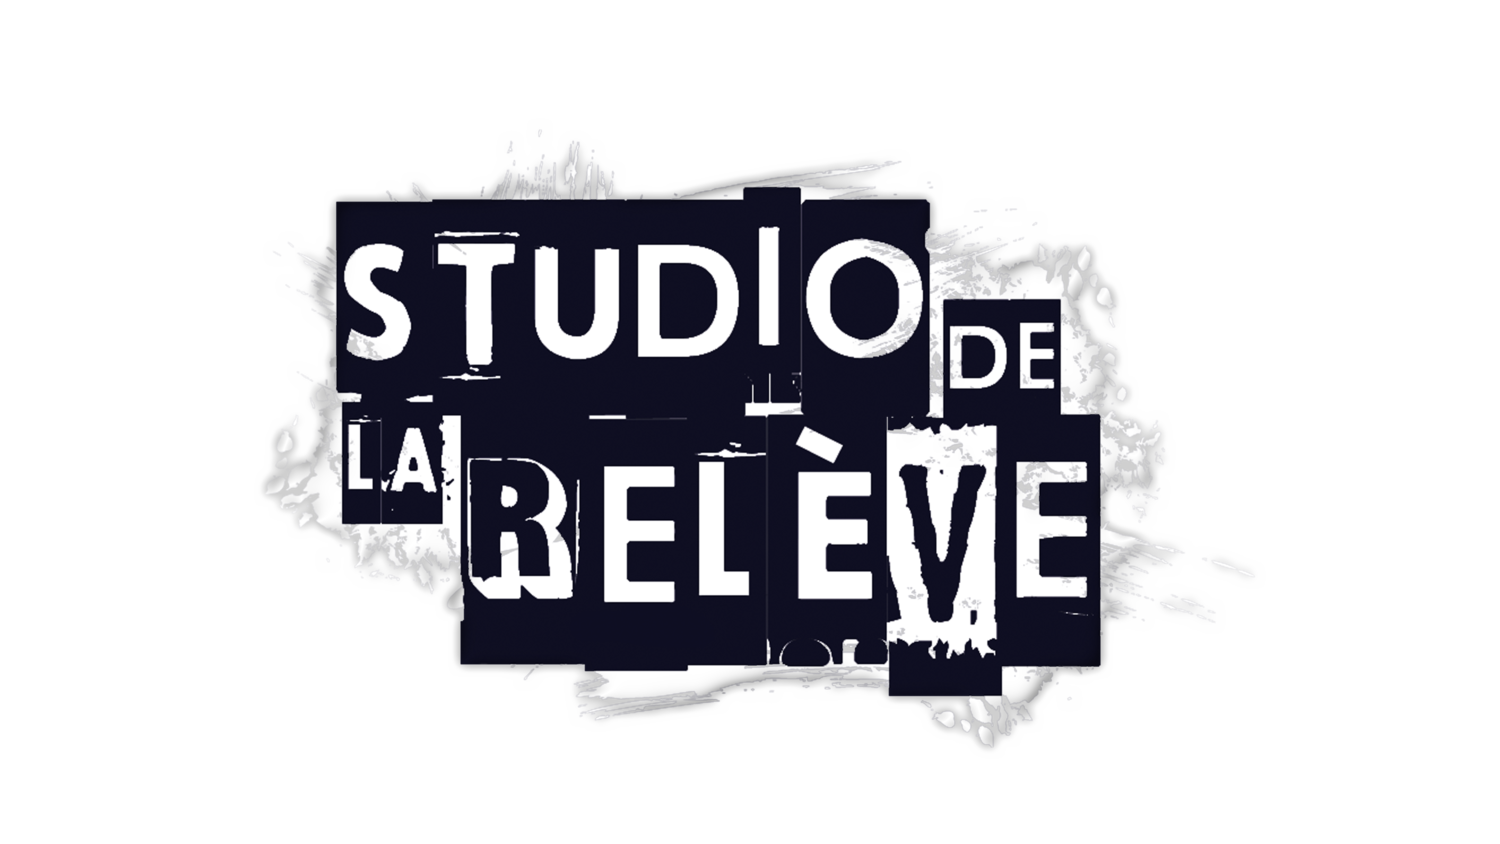 Planning Média supports the studio of the future